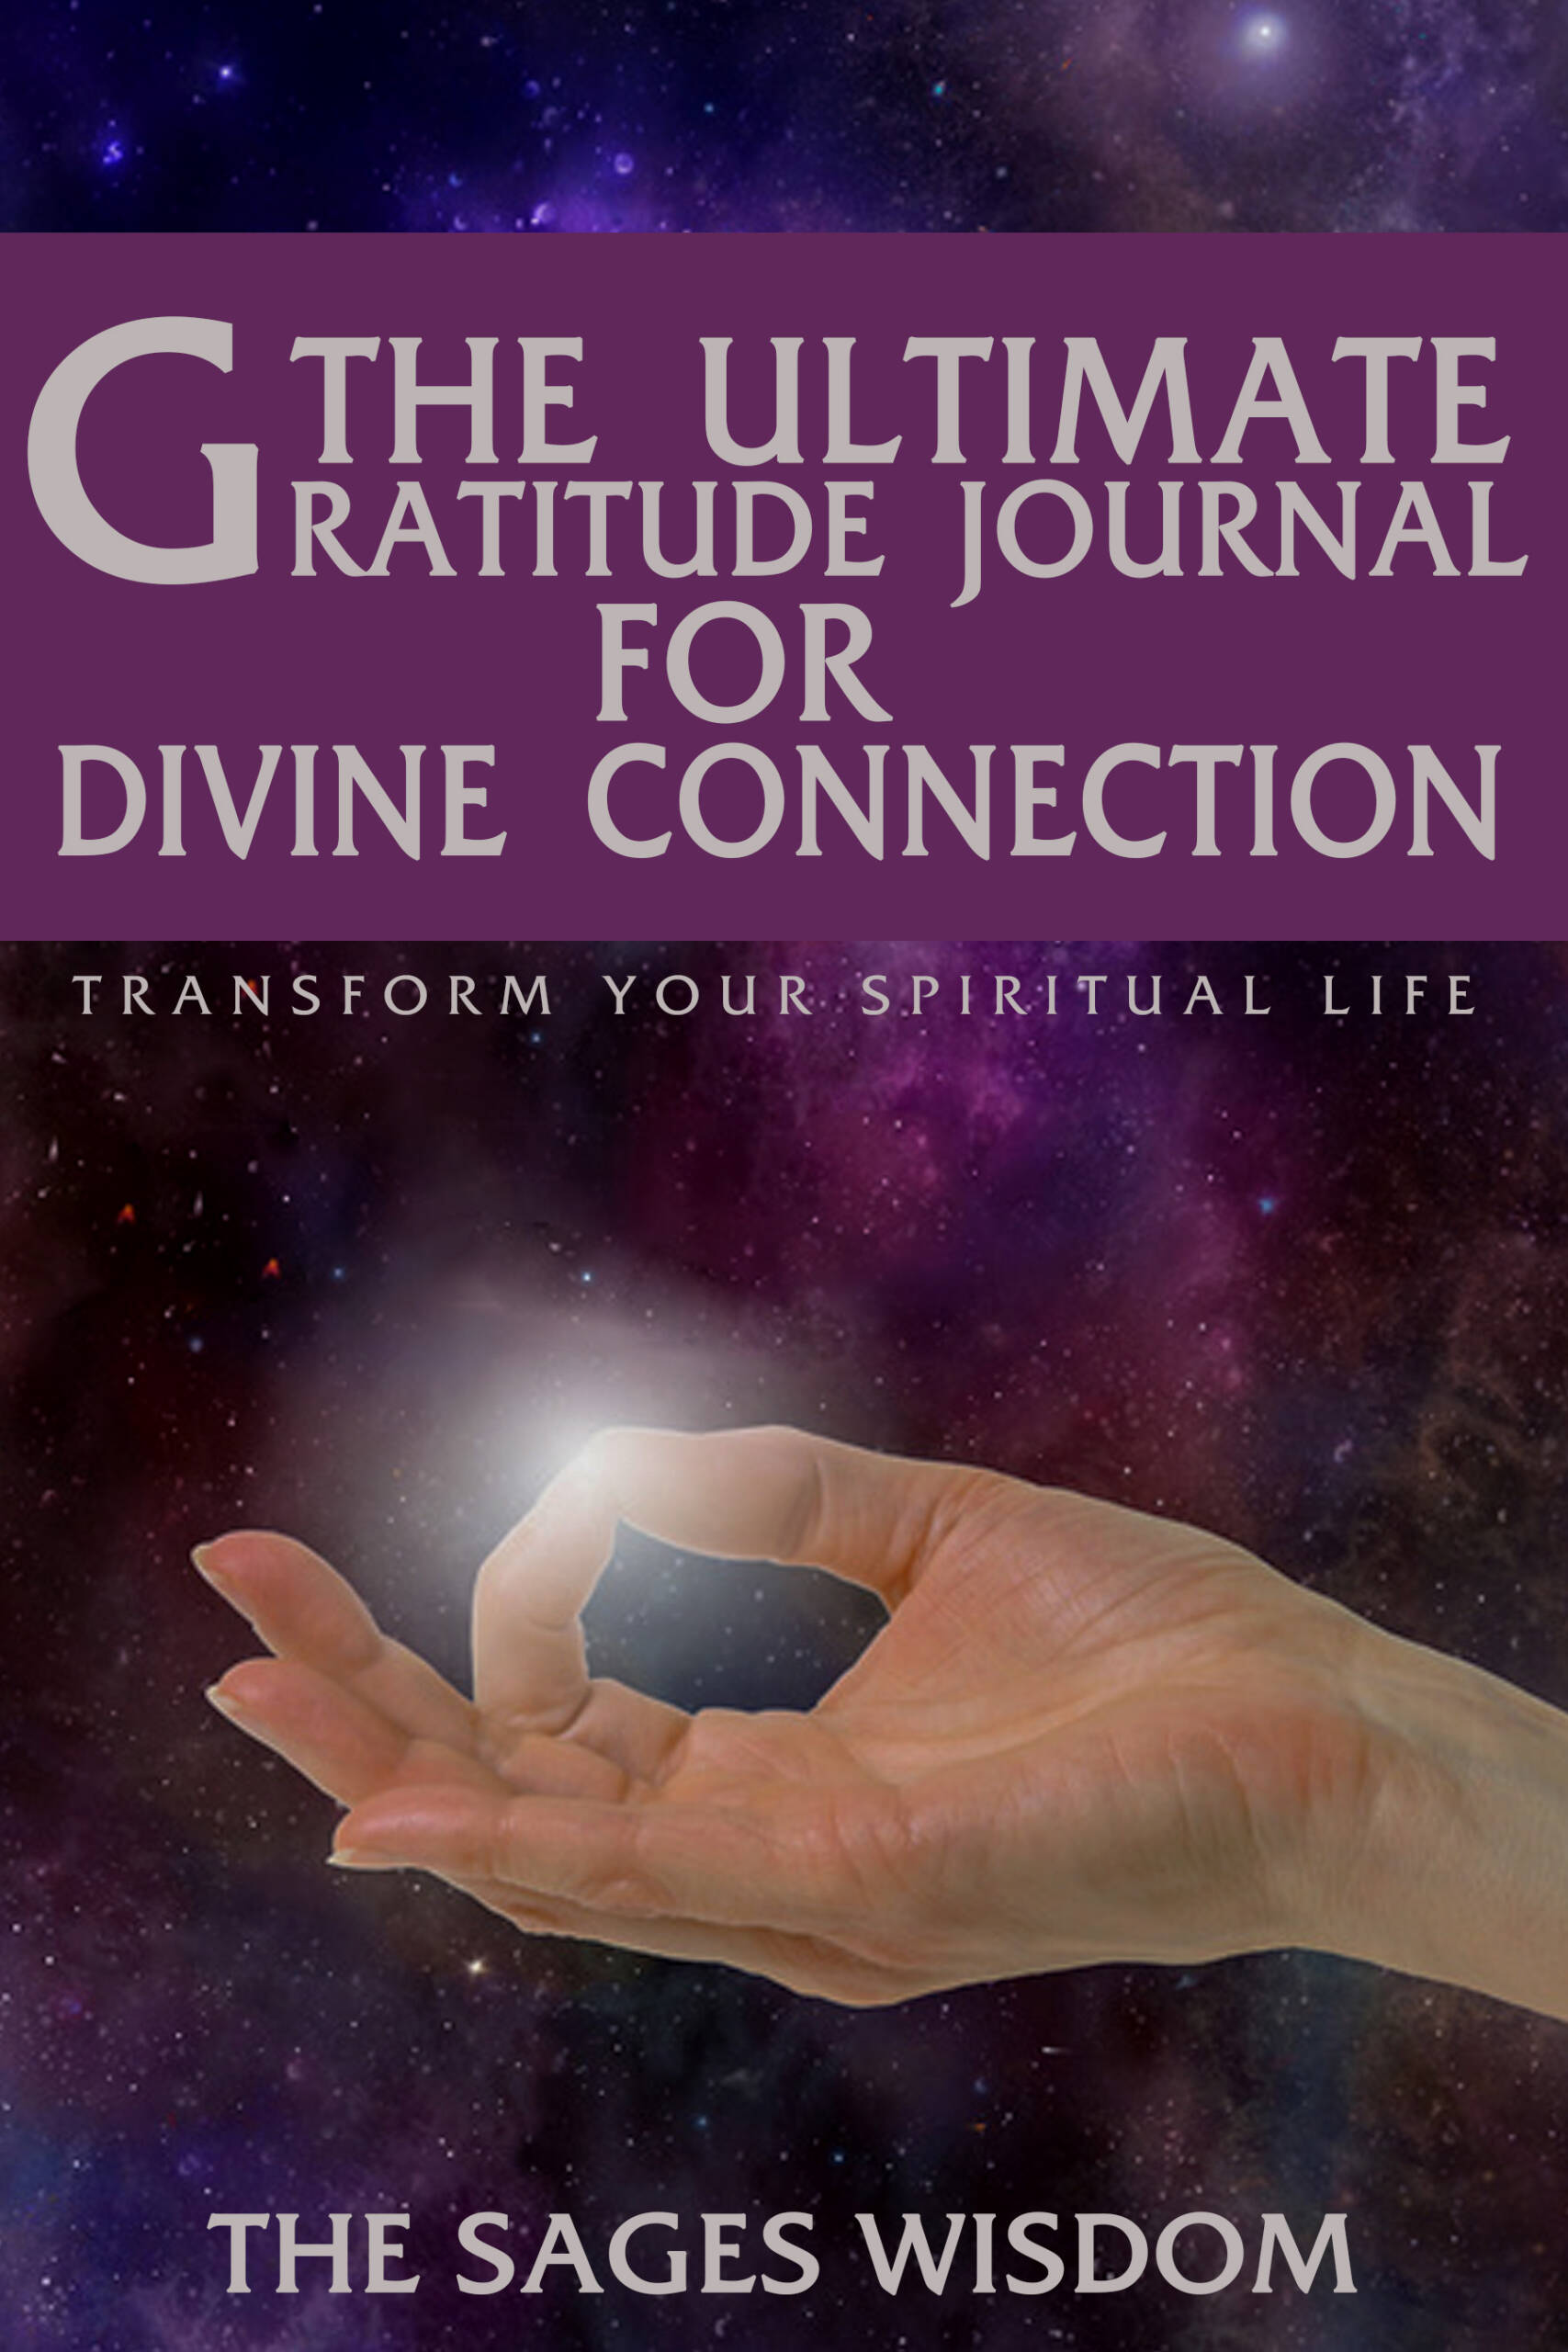 Sarainnerhealing front-1-Gratitude-scaled The Ultimate Gratitude Journal  For Divine Connection  